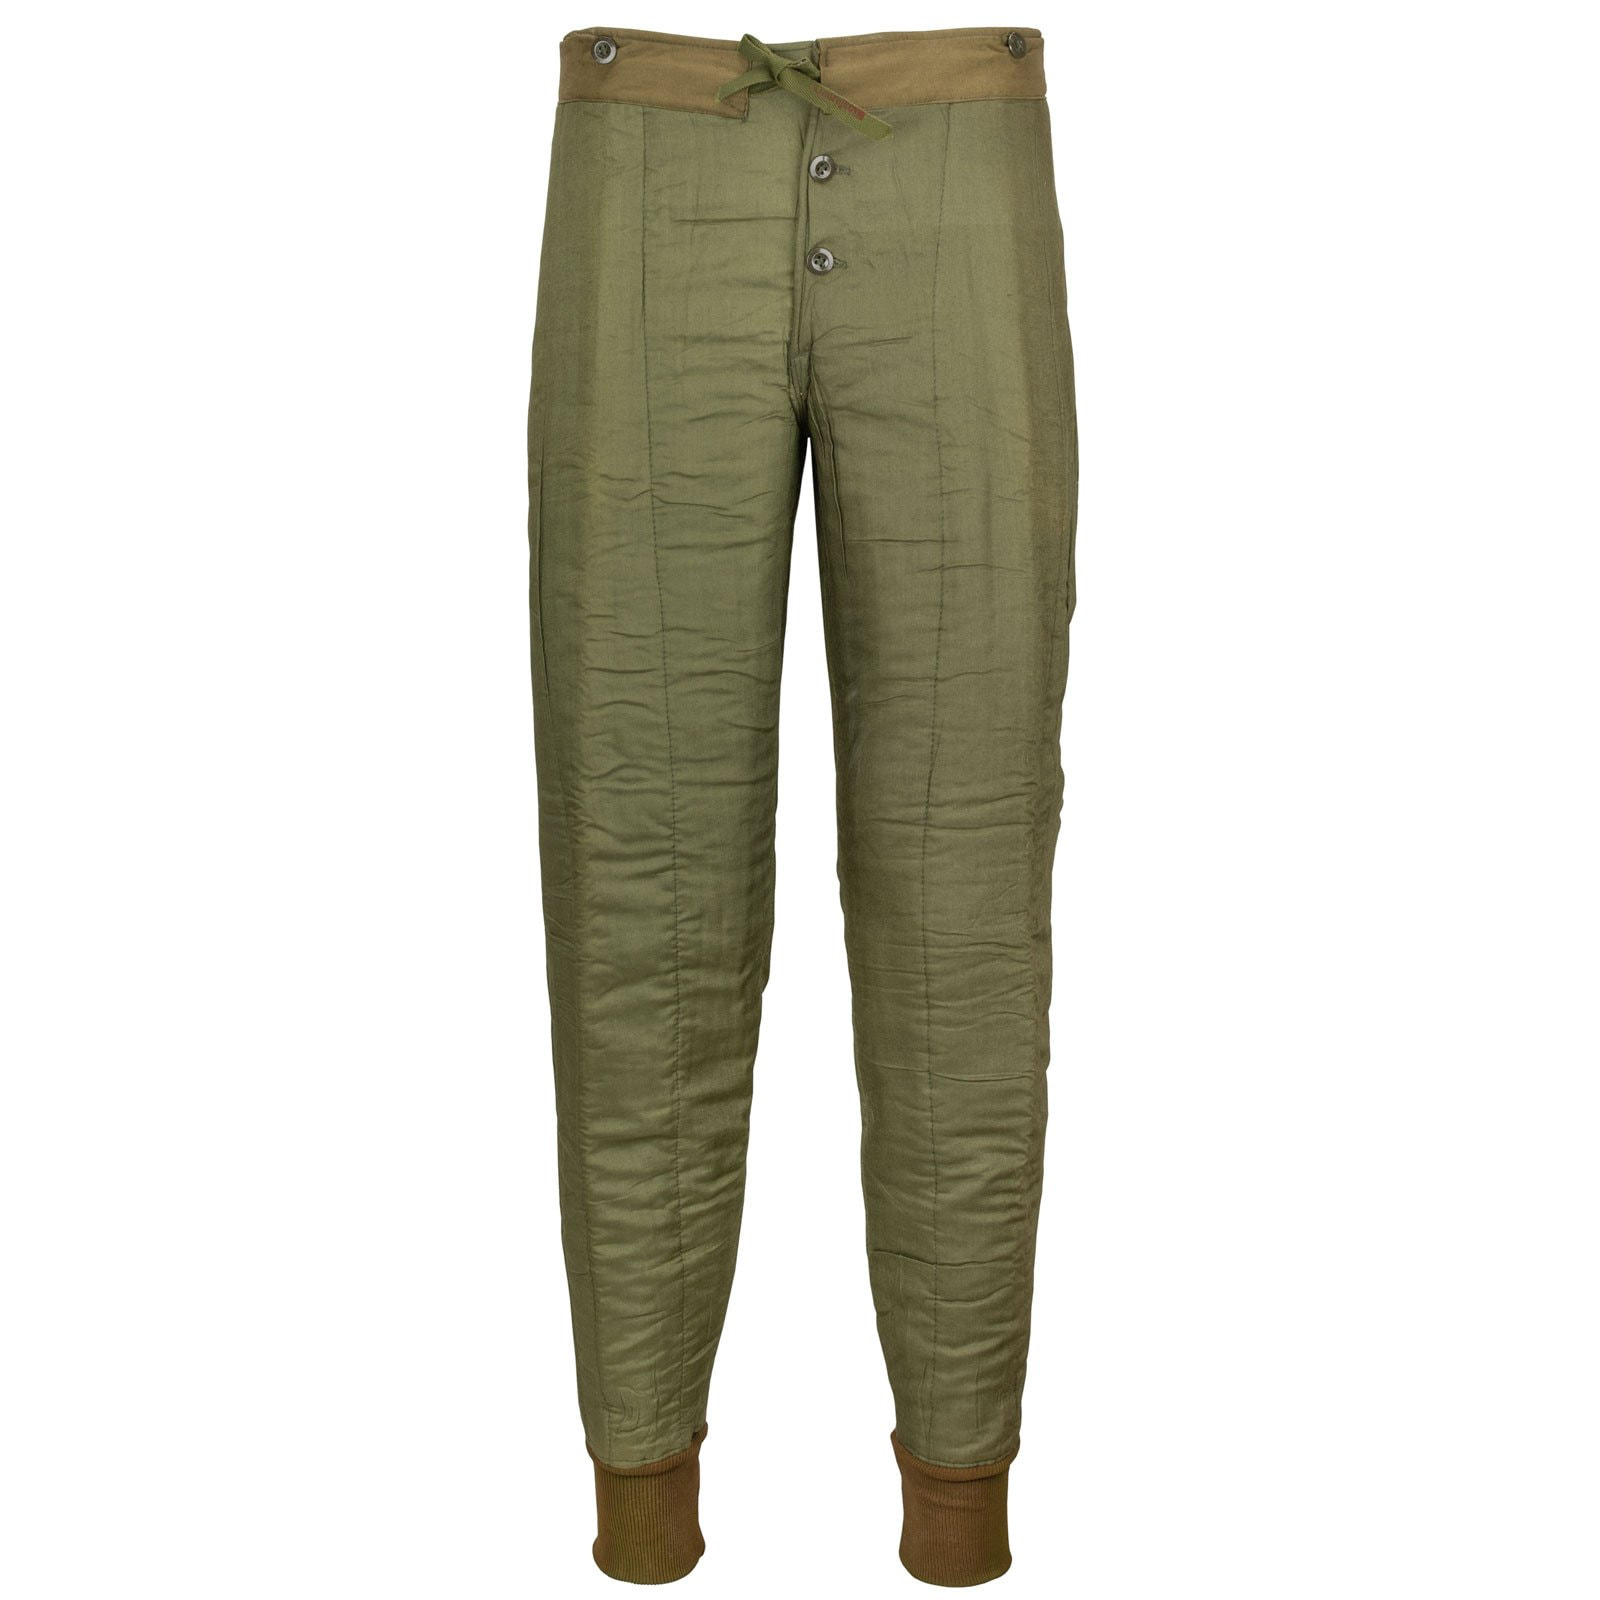 Czech Army Pant Liner  Central Alberta Military Outlet